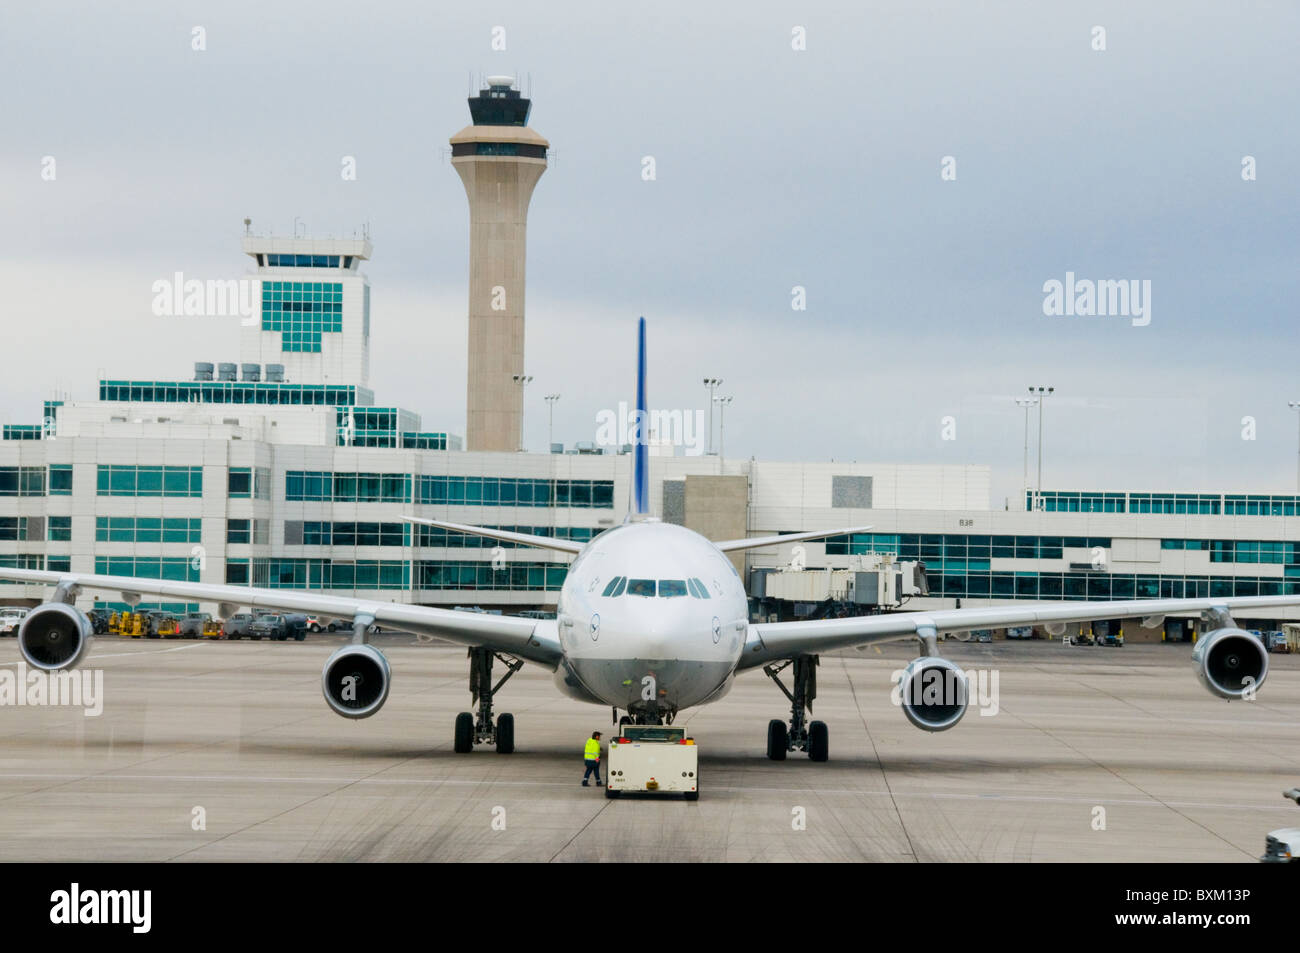 Airplane at airport gate sitting on tarmac being fueled and serviced for departure Stock Photo